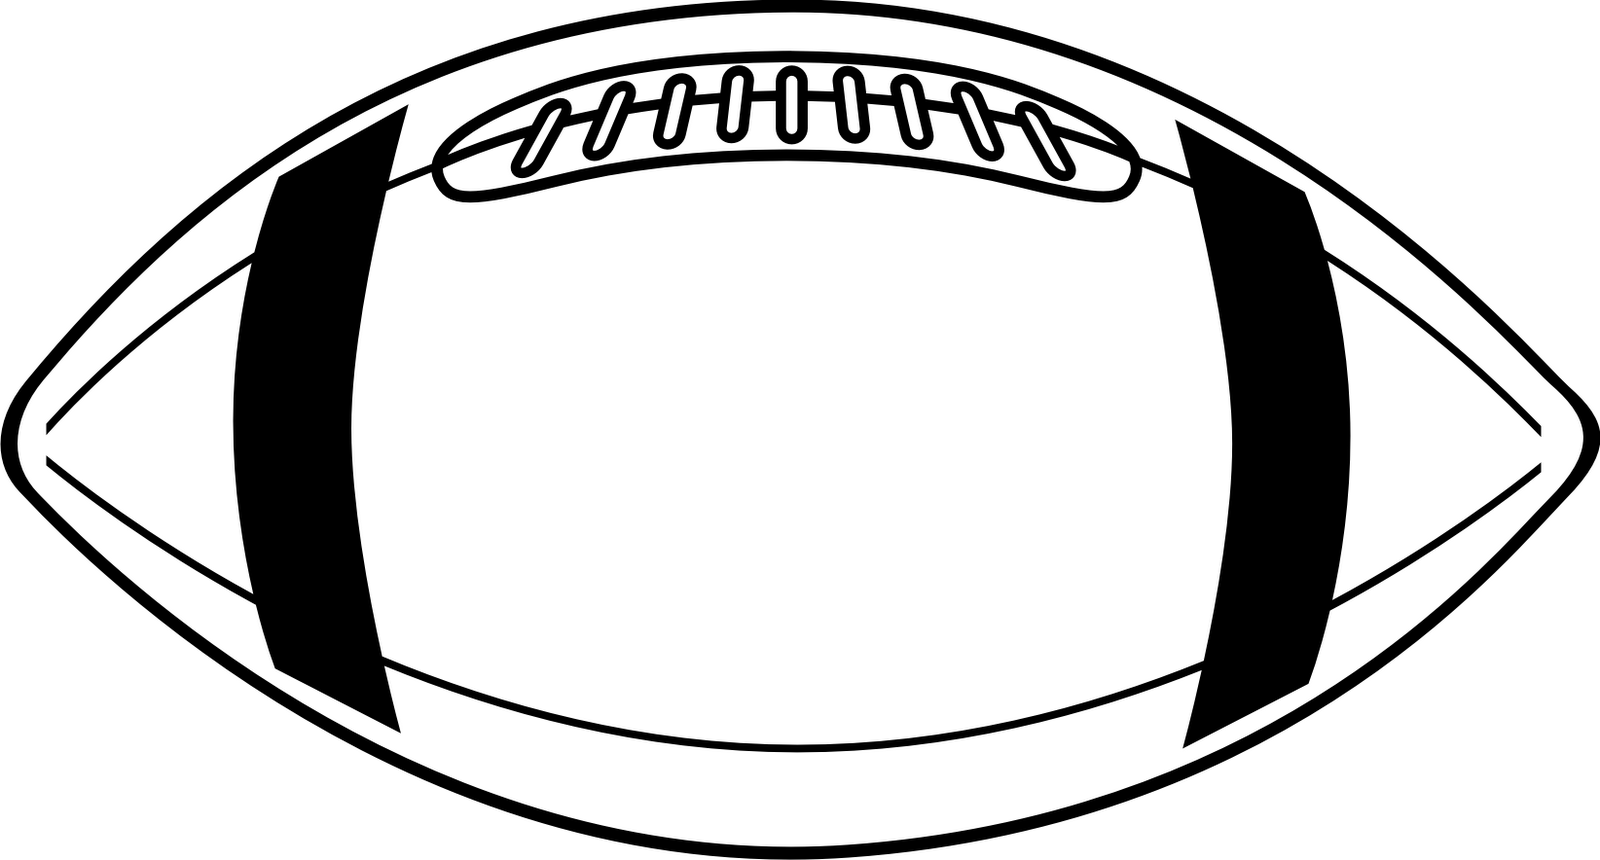 Clip Art Football Stadium Fotosearch Search Clipart Illustration - Fotosearch, Transparent background PNG HD thumbnail